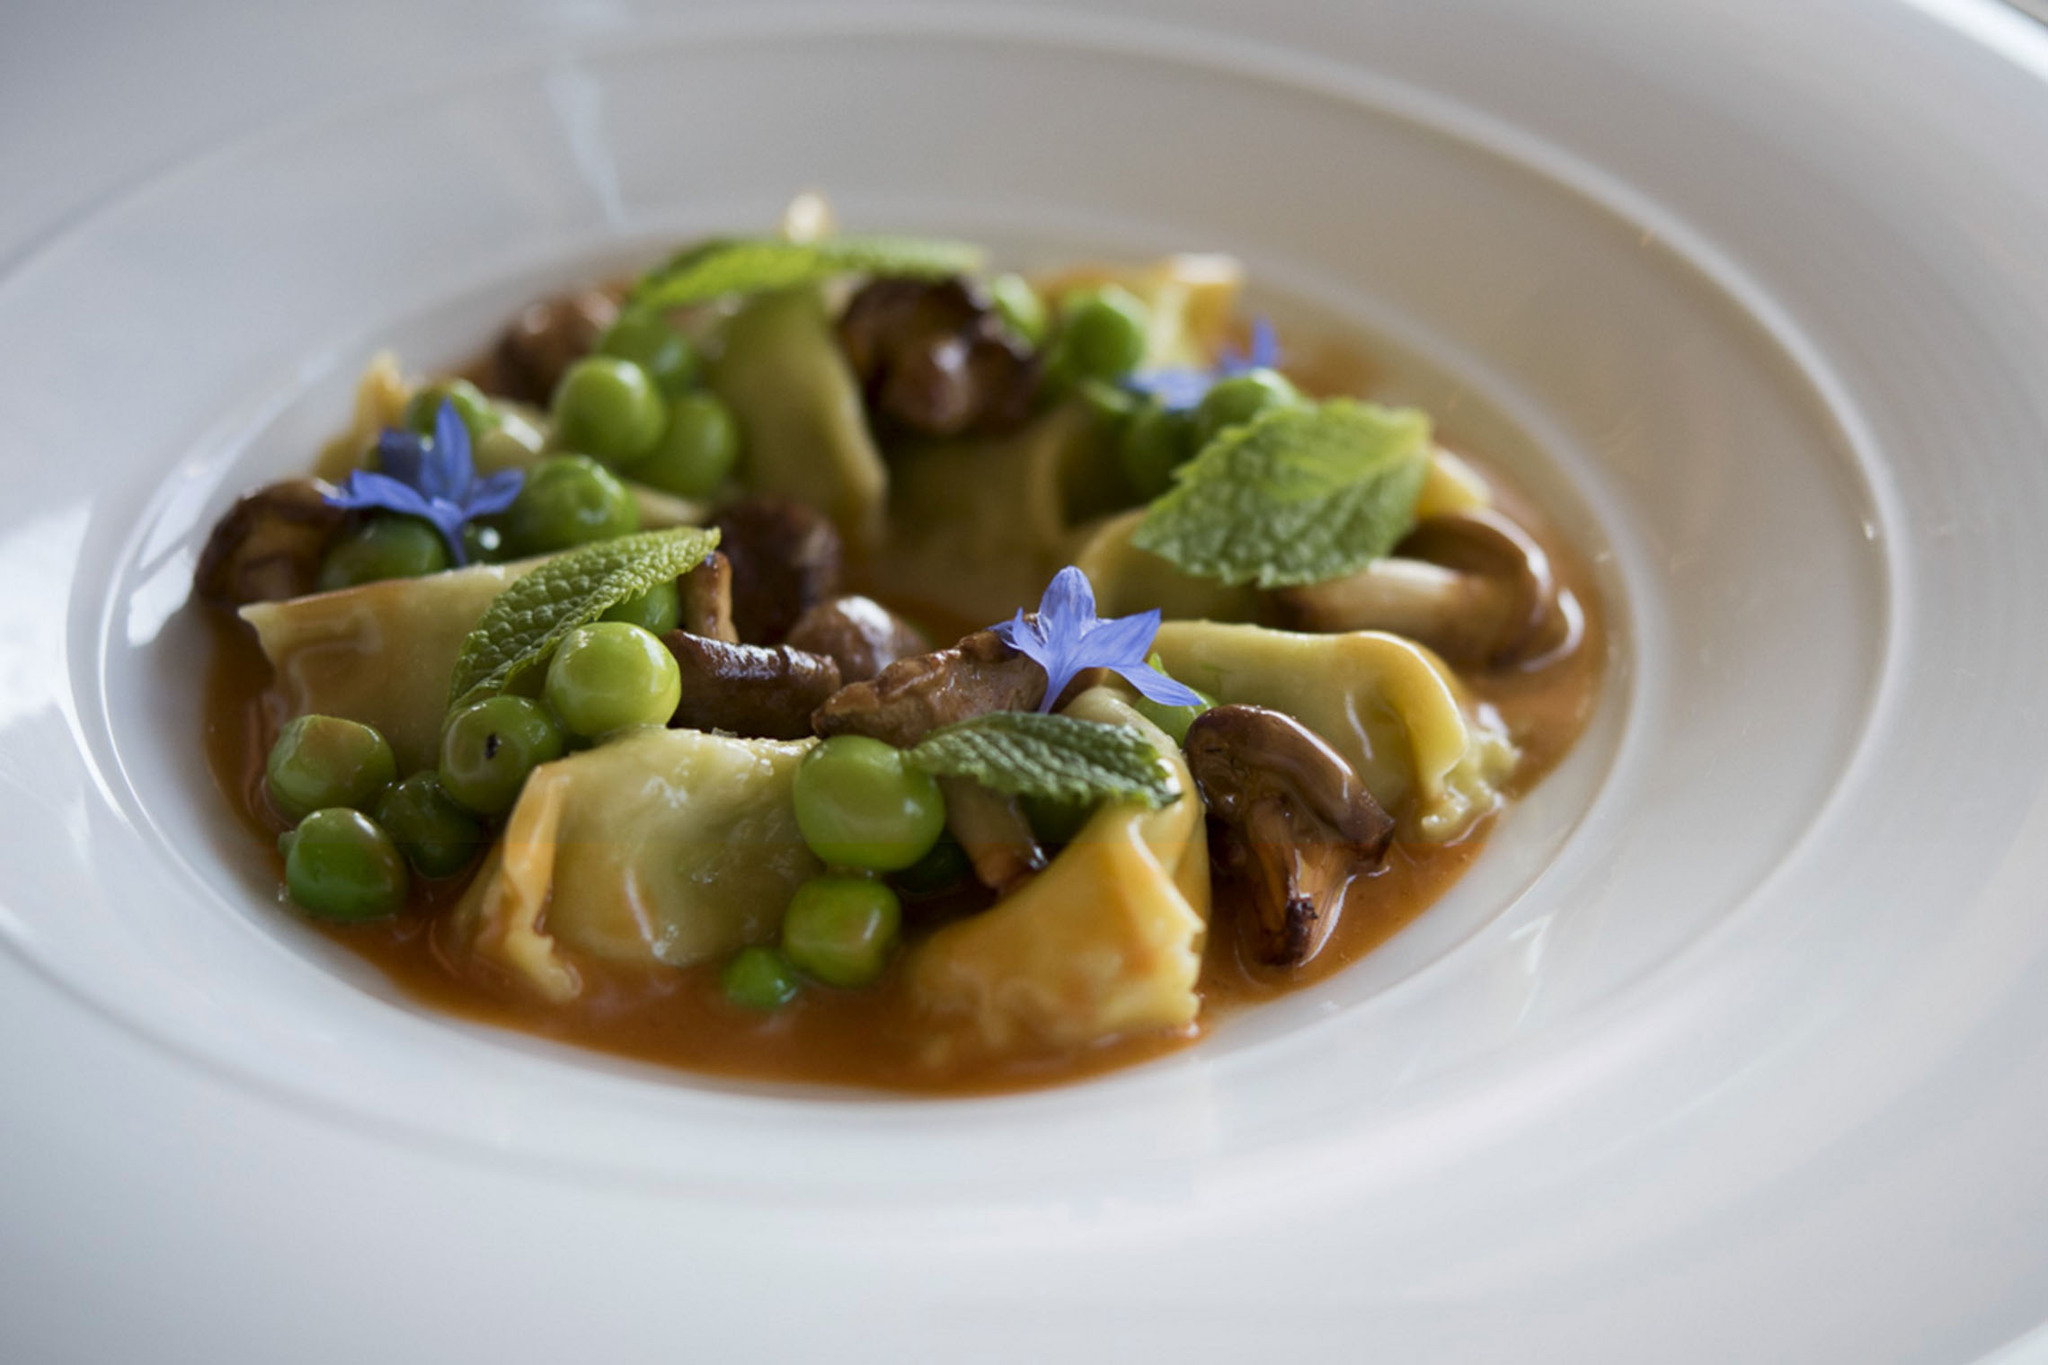 A little veal stock puts the agnolotti over the top. Courtesy of Copine